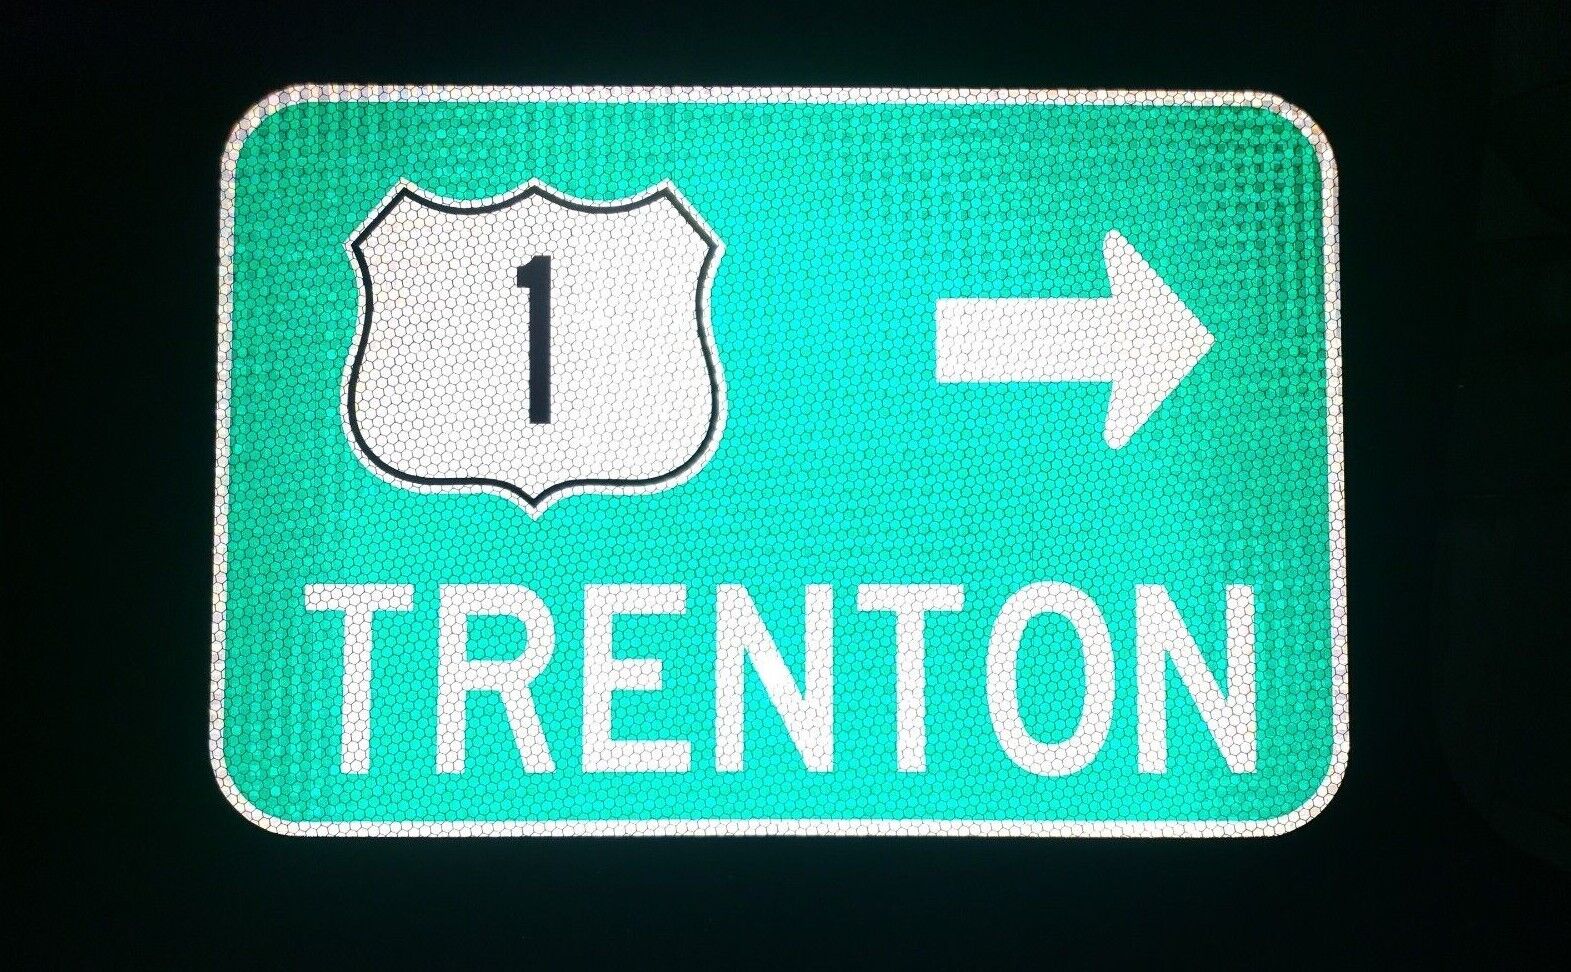 TRENTON, New Jersey route road sign 18